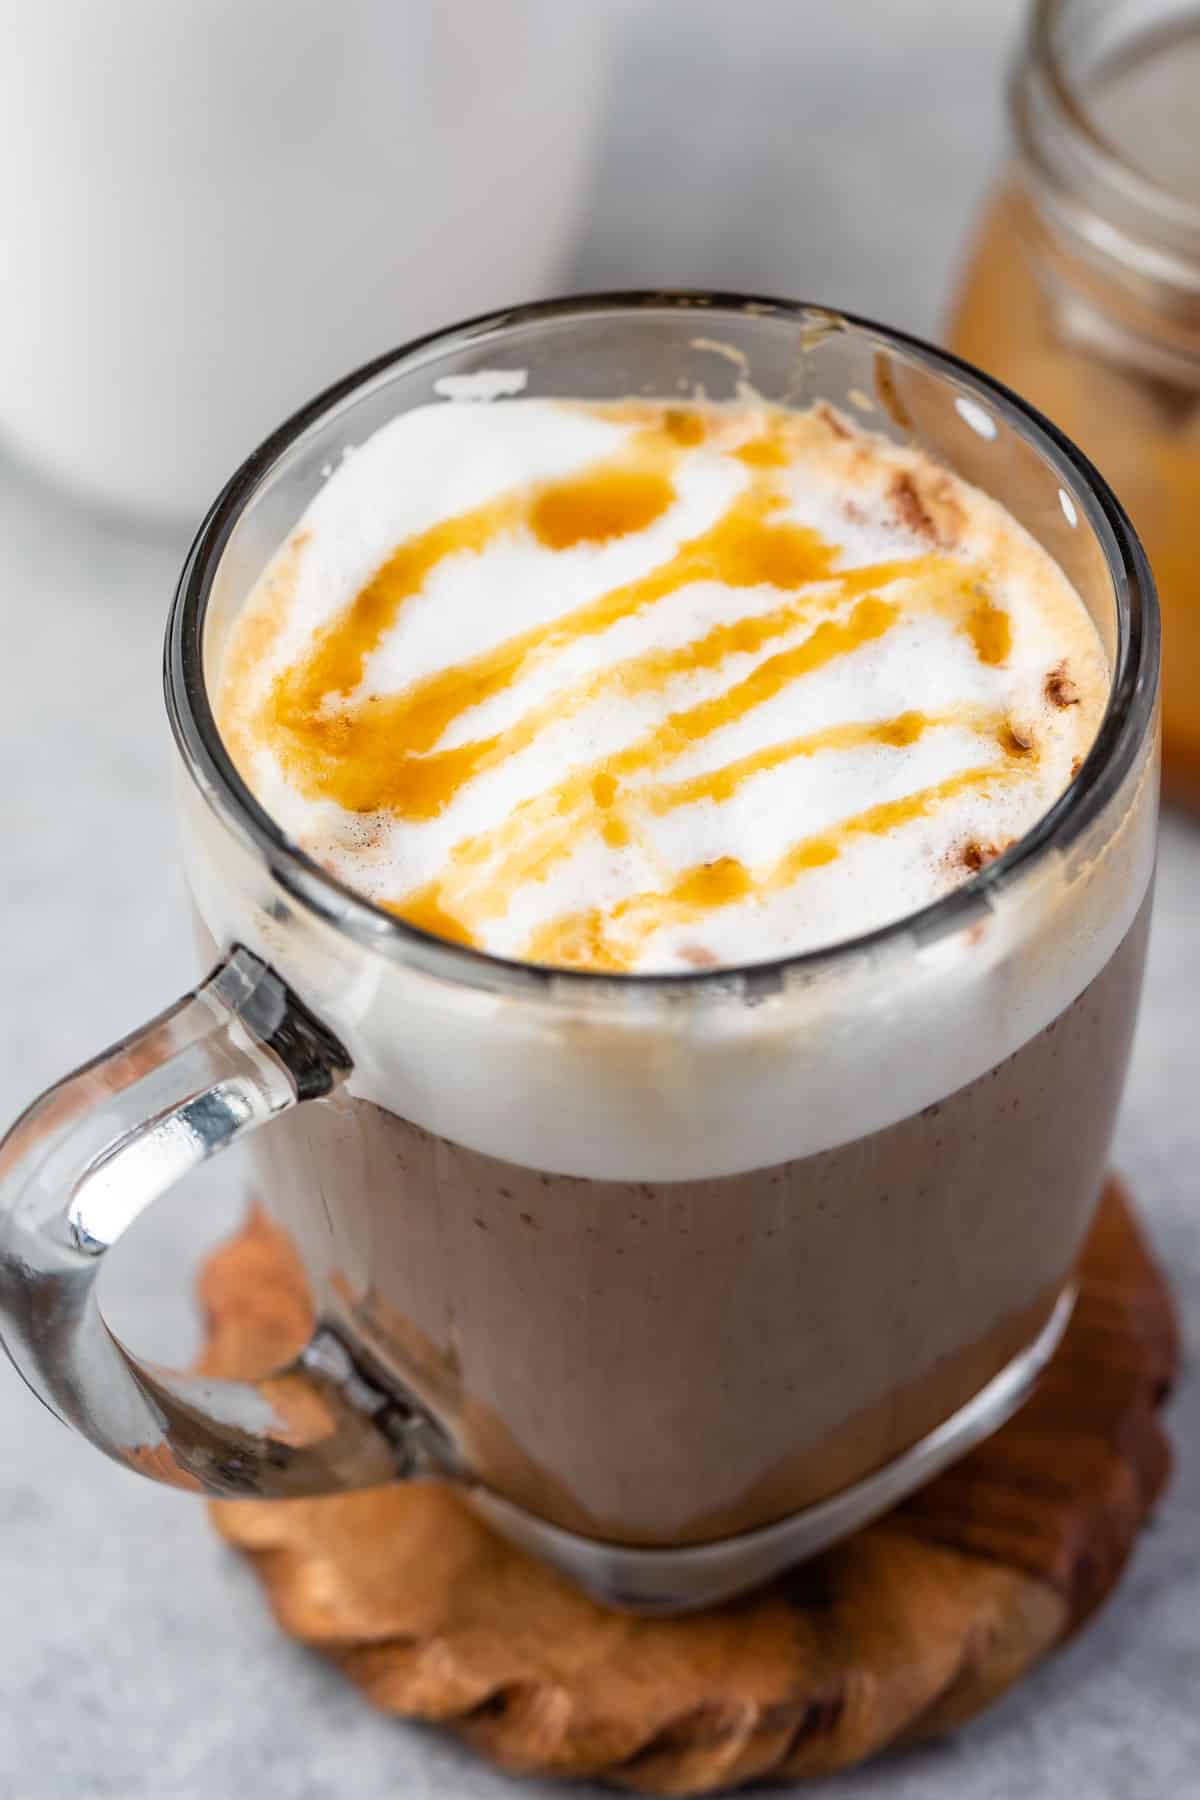 Mr. Coffee - This Salted Caramel Mocha Frappe is the afternoon pick me up  you didn't know you needed, until now 😉 . Make this recipe with our 3-in-1 Frappe  coffeemaker at